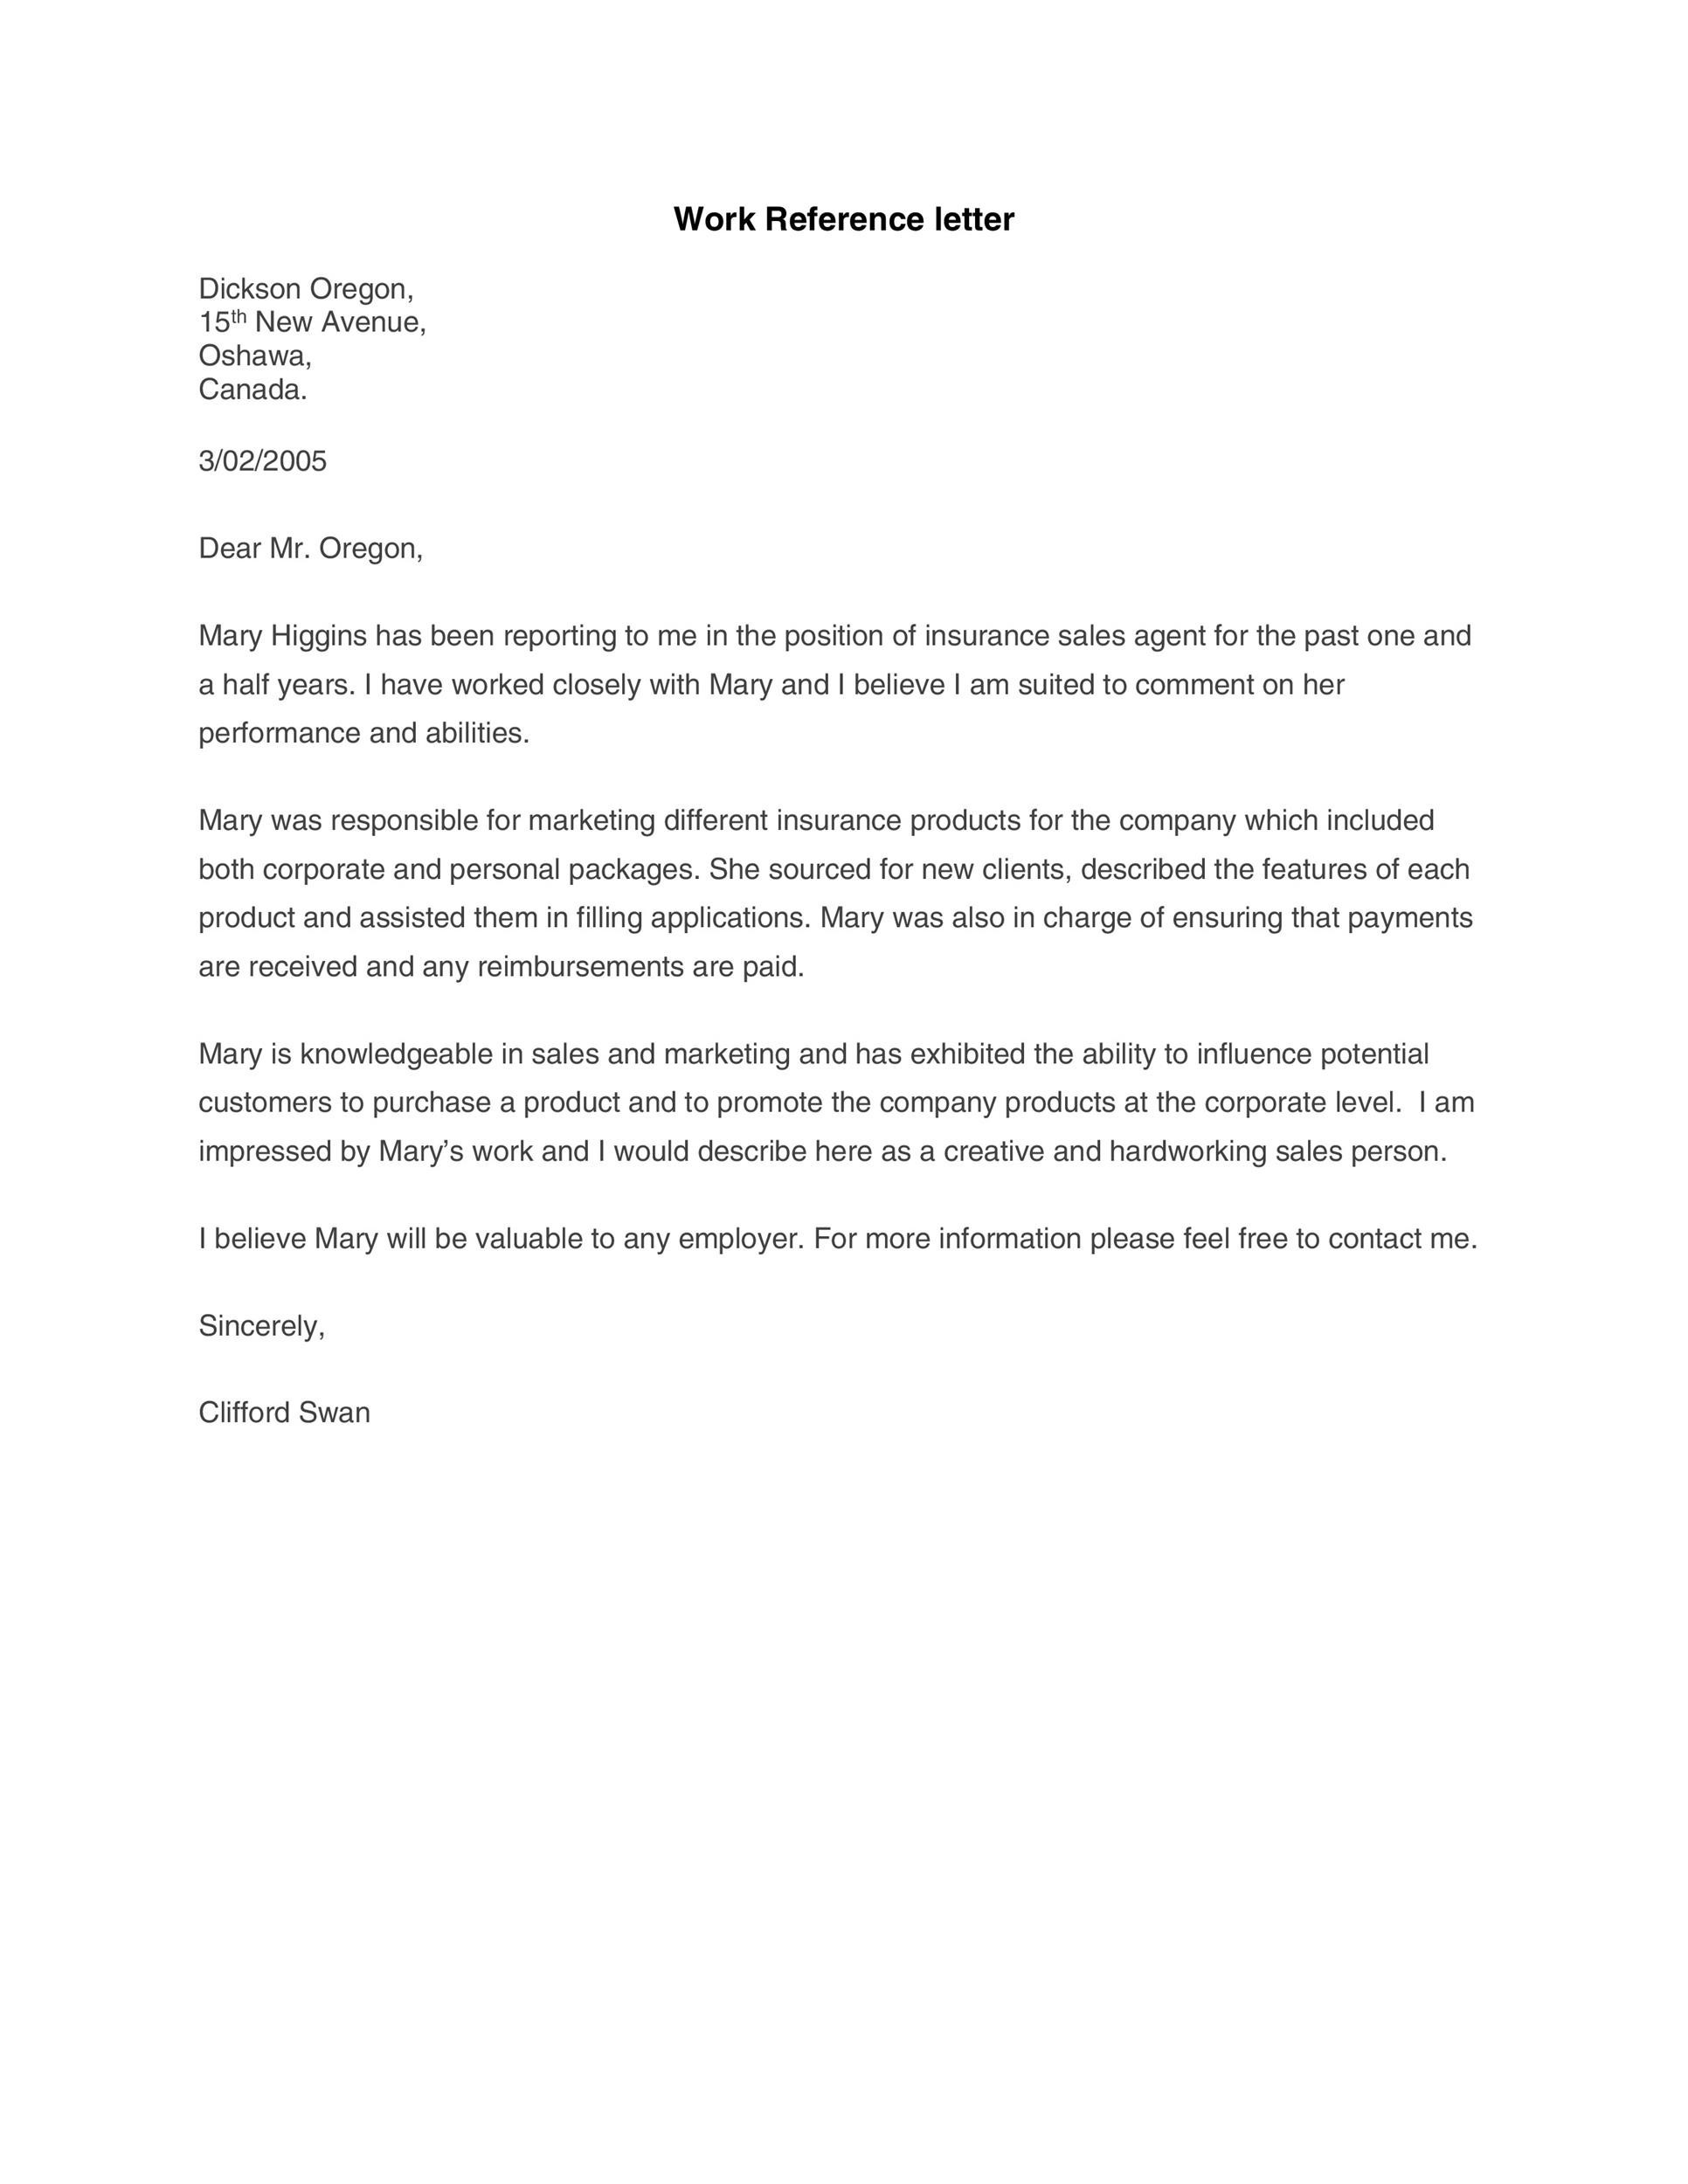 How to Write a Letter of Recommendation – 8 Free Templates & Samples